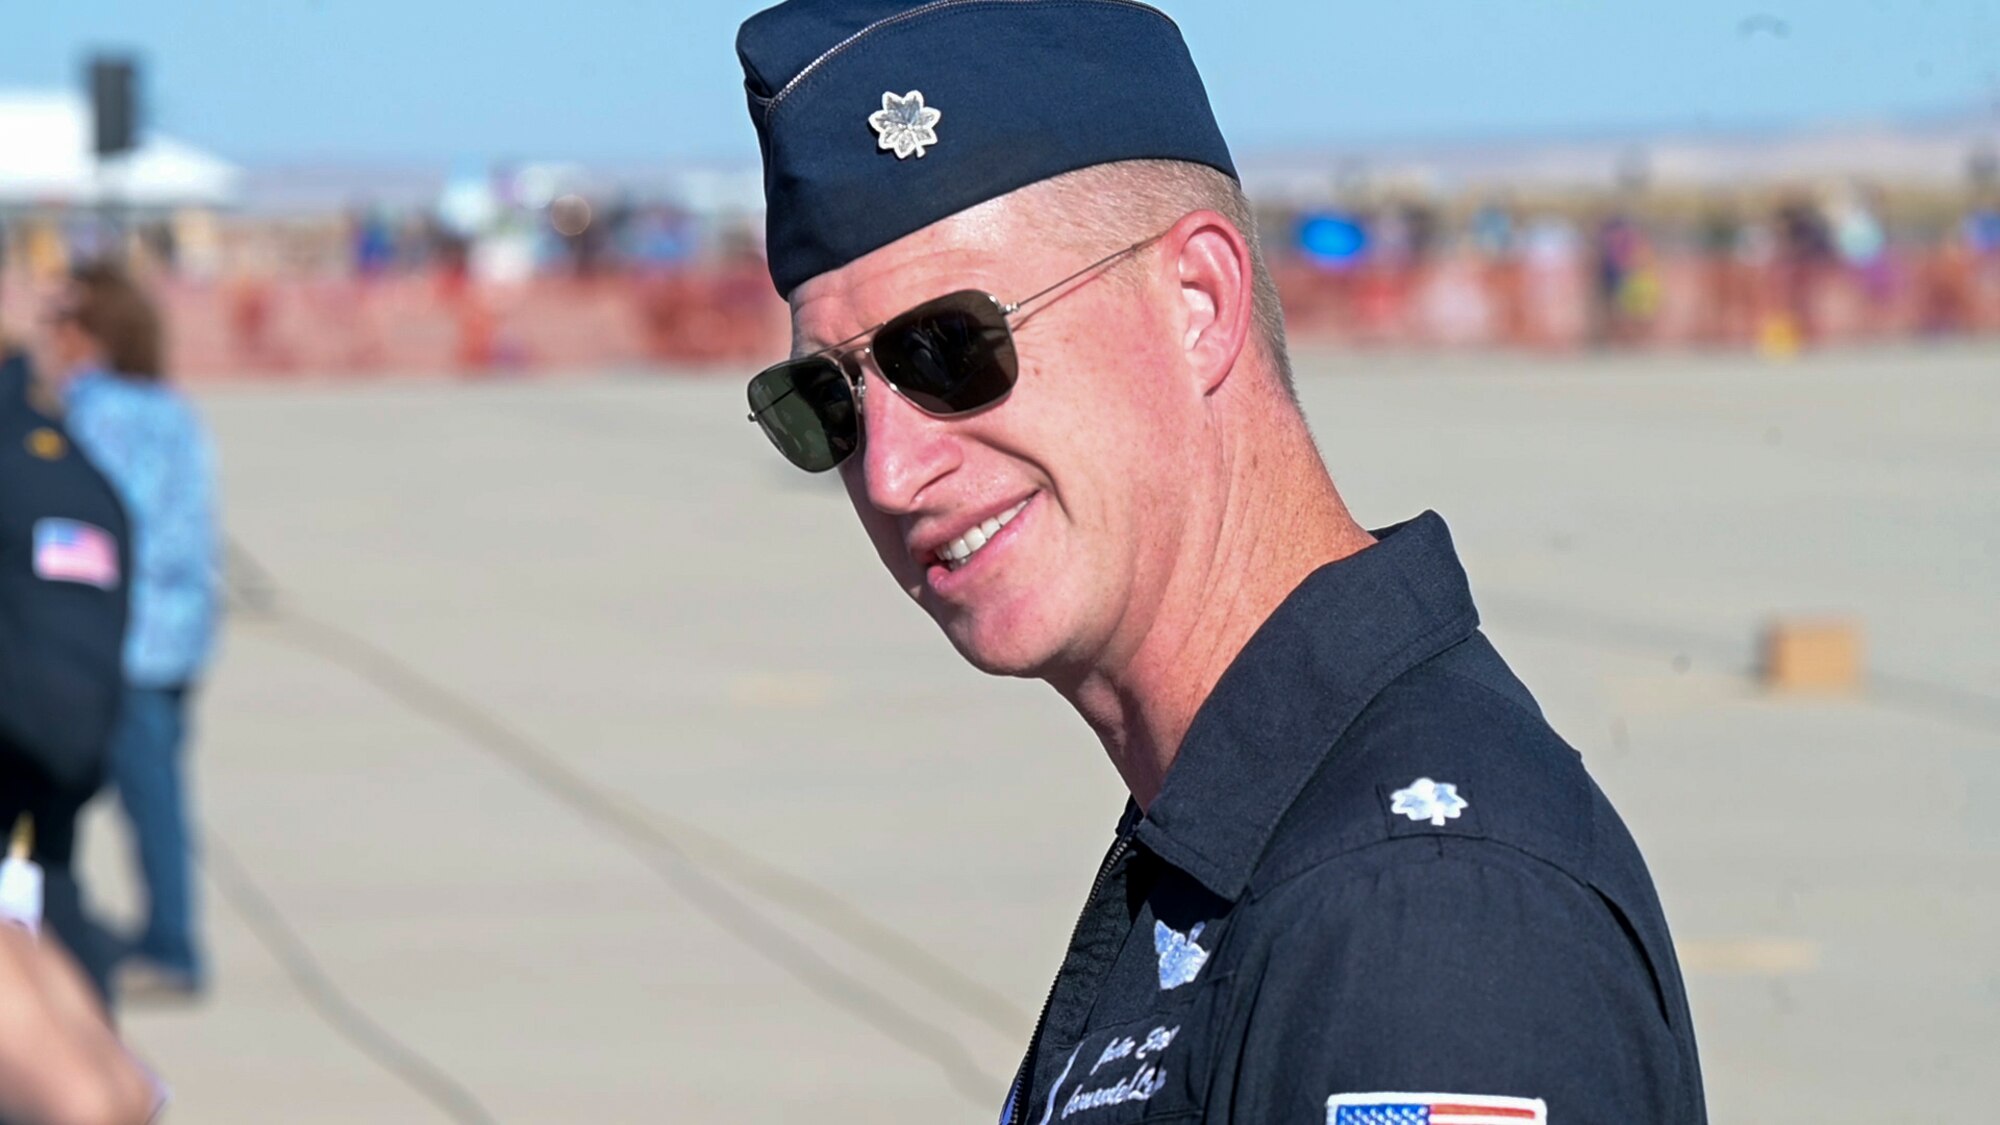 Lt. Col. Justin "Astro" Elliott, USAF Thunderbirds Commander, signs autographs during the 2022 Aerospace Valley Air Show at Edwards Air Force Base. (U.S. Air Force photo by Adam Bowles)